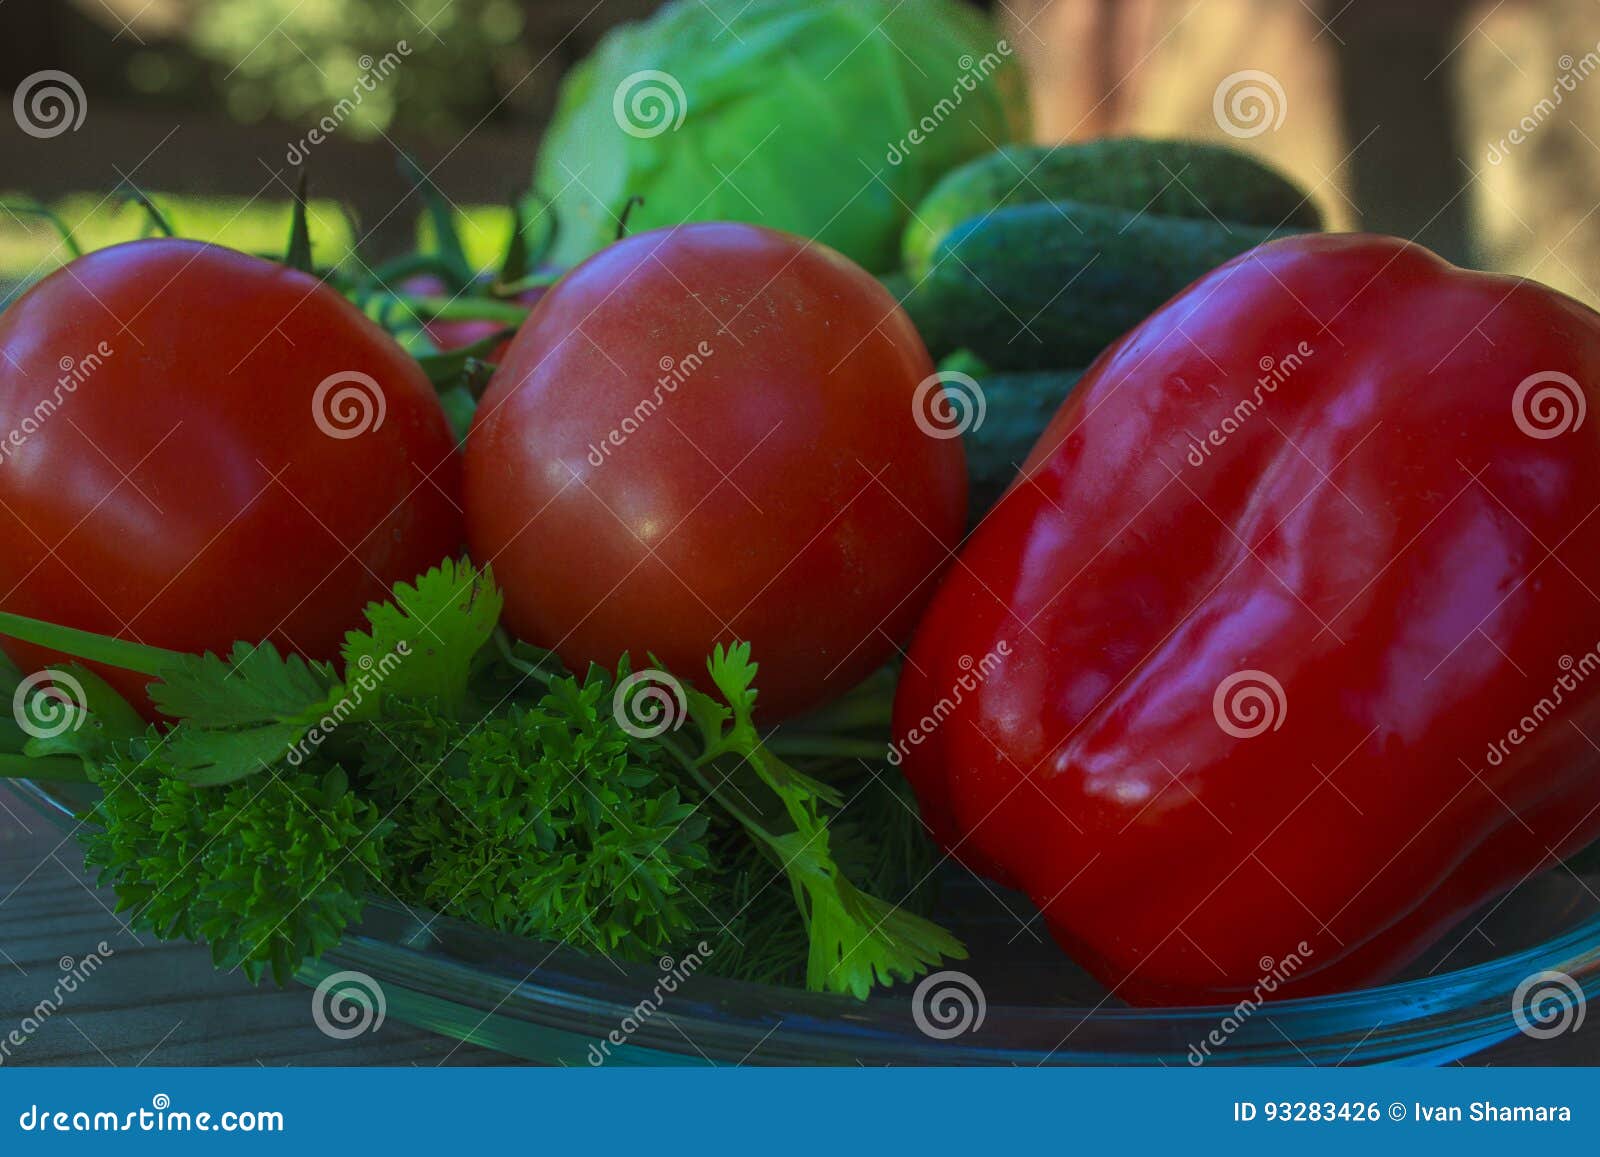 Vegetables stock photo. Image of vegetables, parsley - 93283426